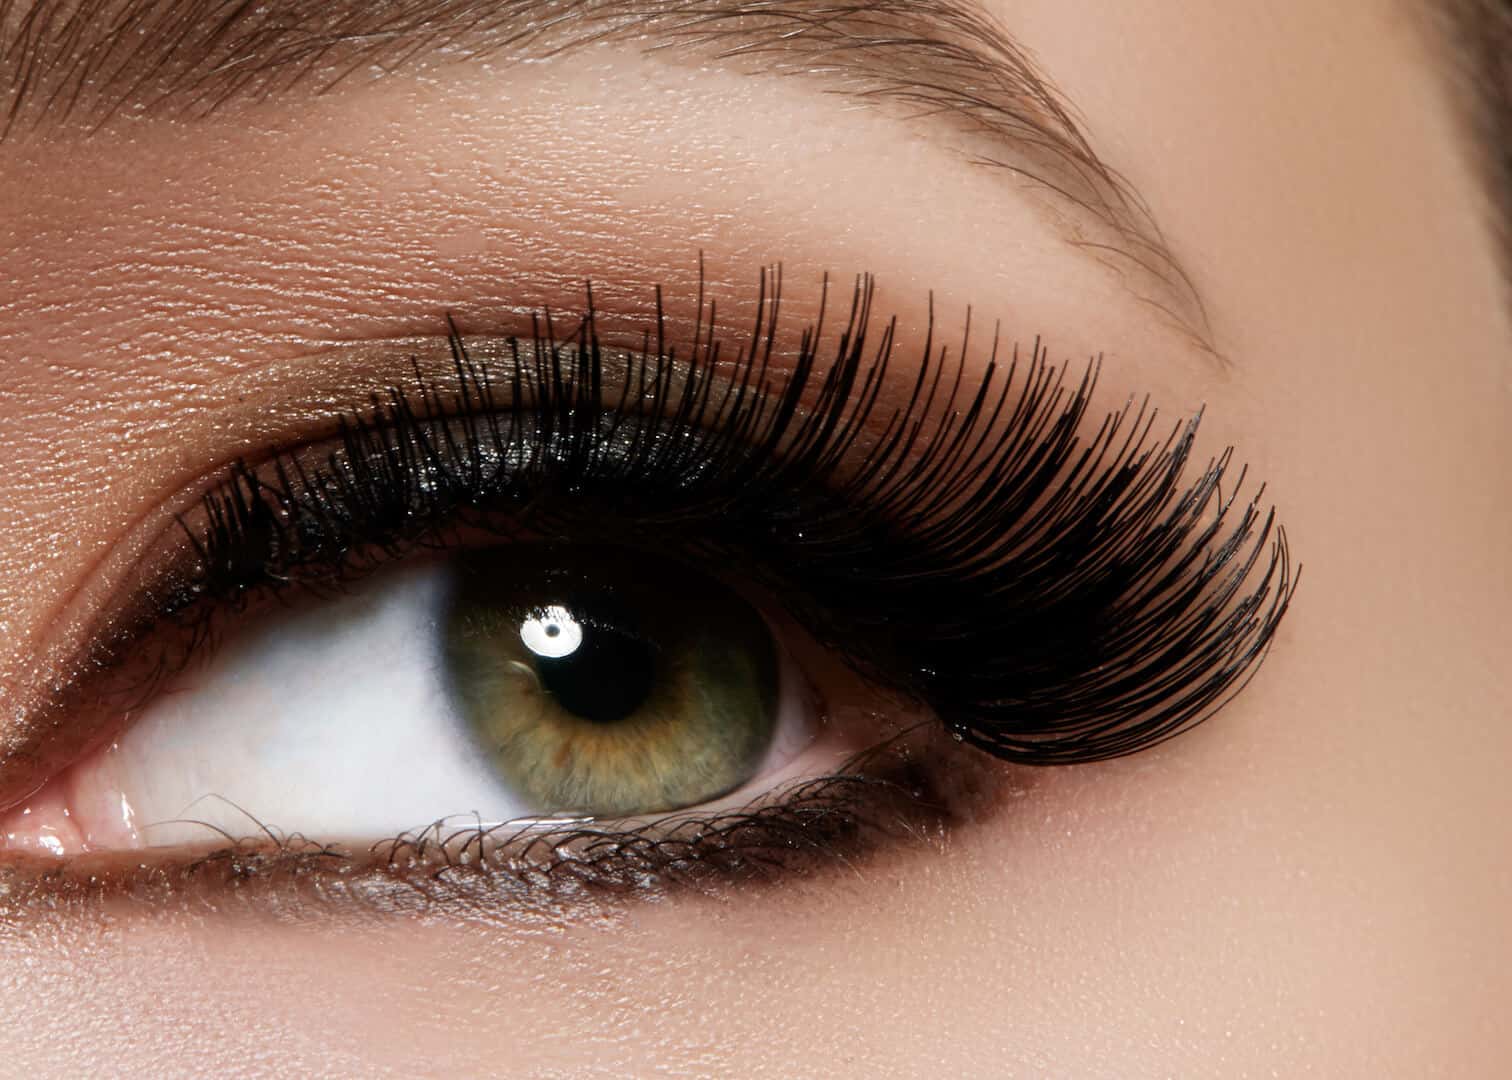 How To Use Castor Oil For Eyelash Growth? – Guide